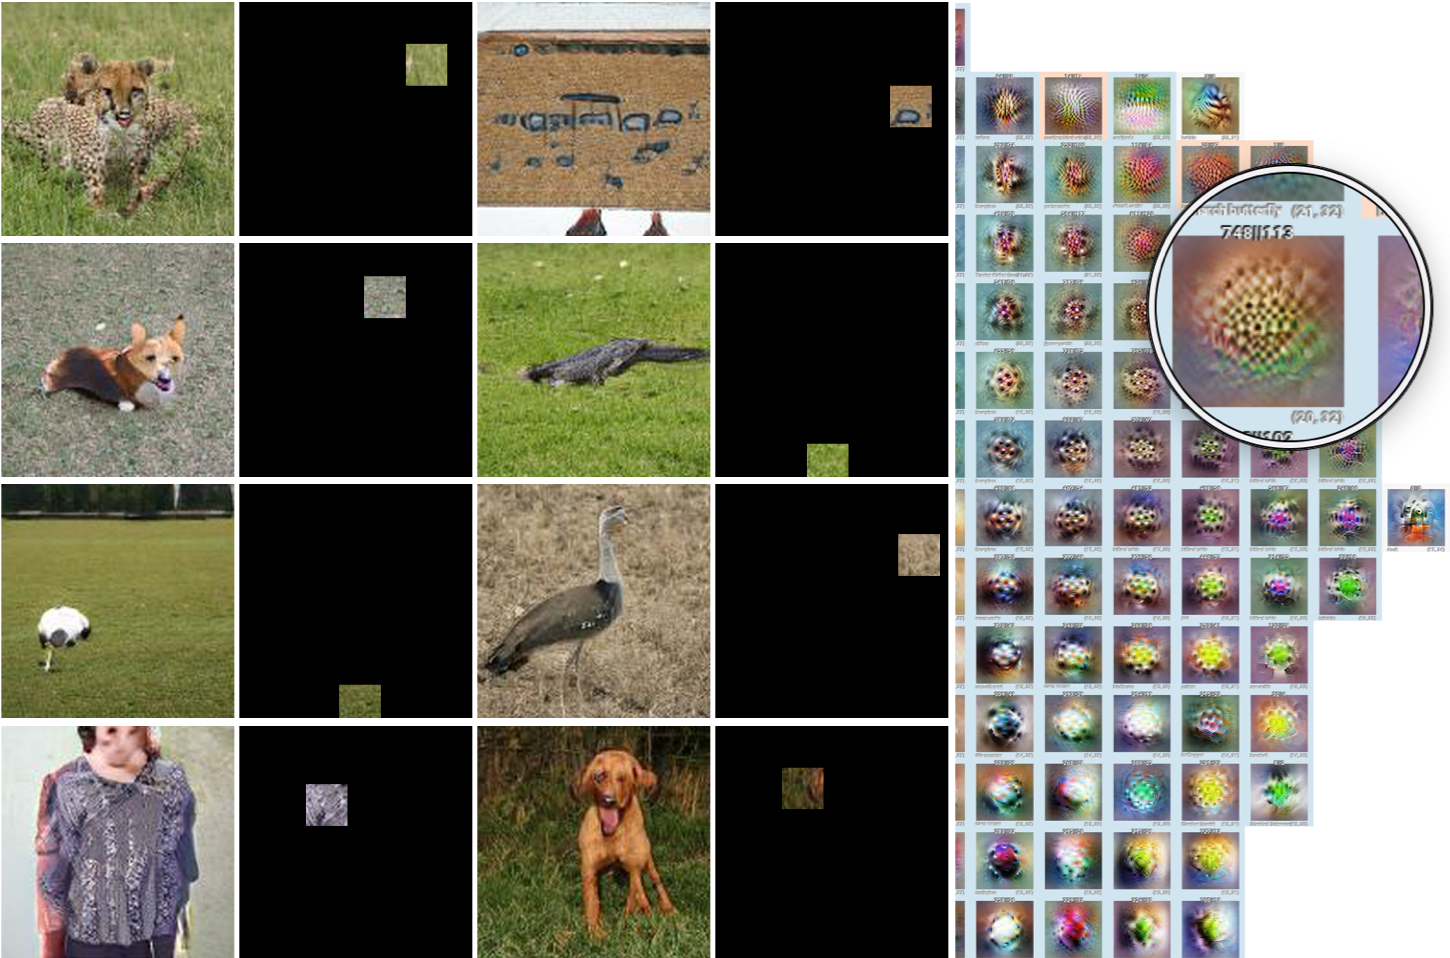 Mixed3a, Cell(20,32) in 40x40 Grid: Dataset examples &amp; spatial activation slices taken from BigGan during experiment